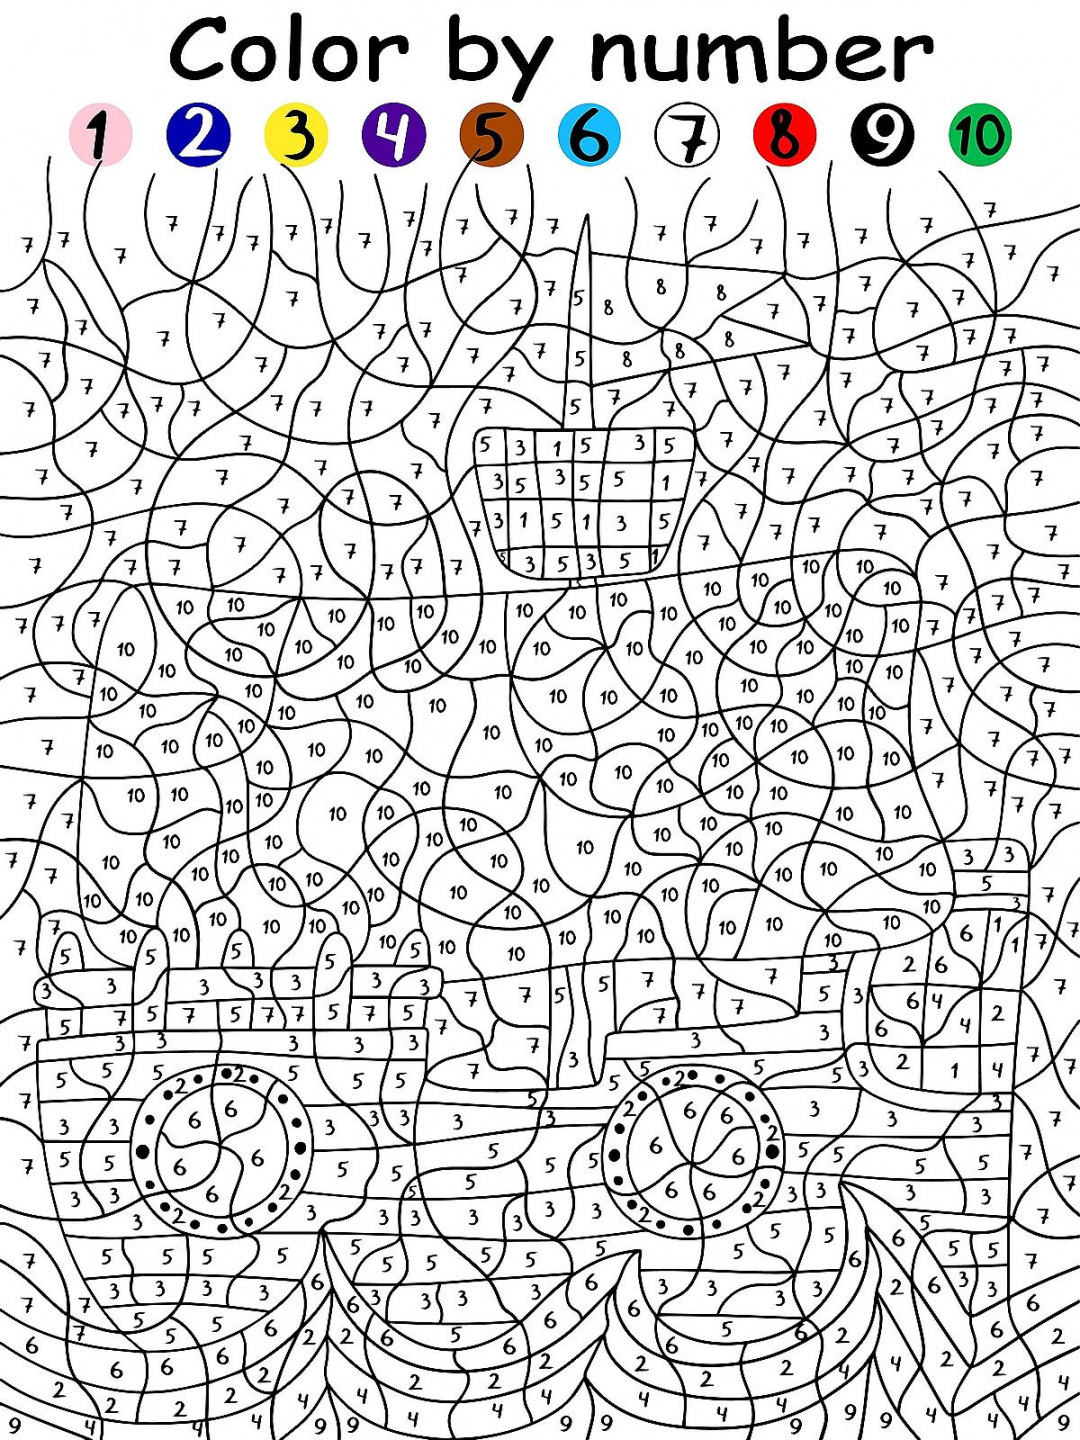 Free Printable Color By Number - Printable - Color By Numbers Activity Pages for Kids: Free & Fun Coloring